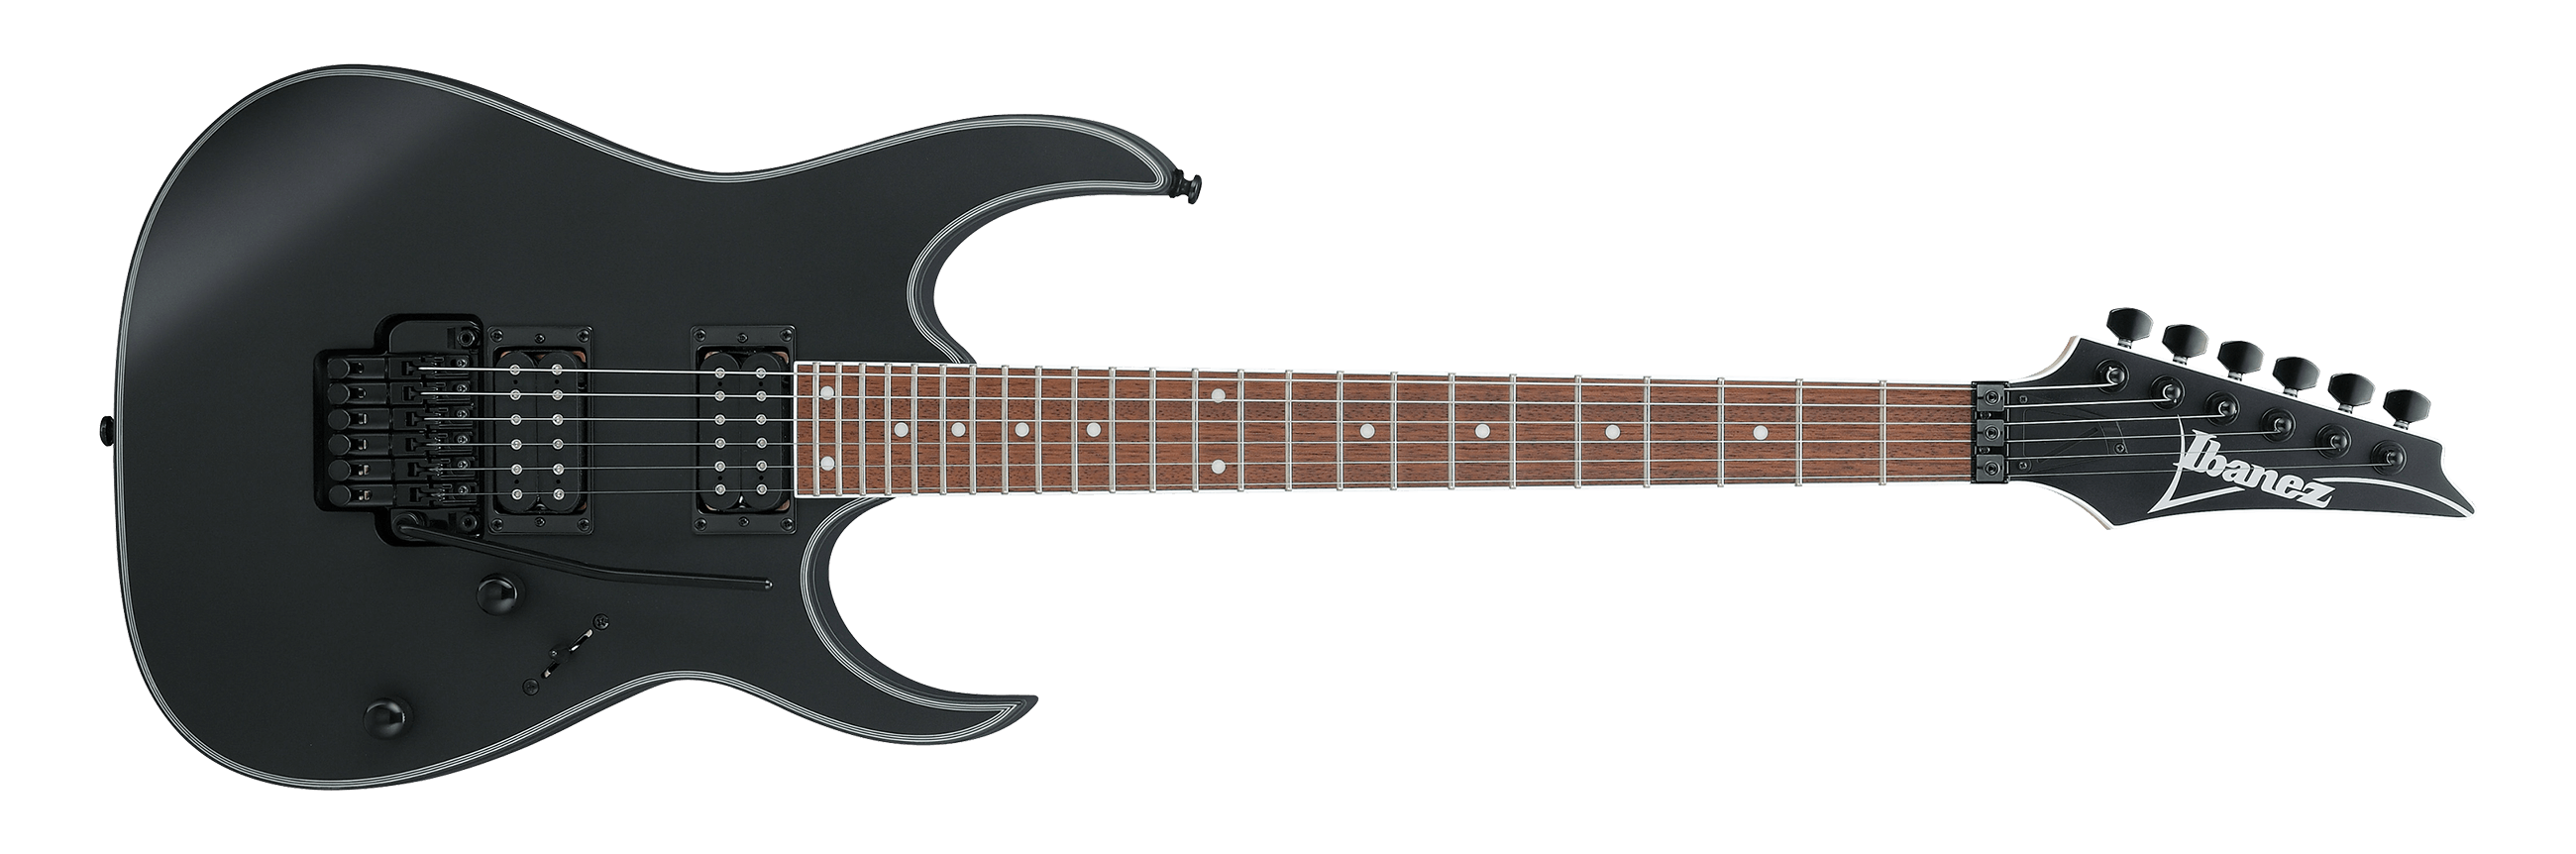 RG320EXZ | RG | ELECTRIC GUITARS | PRODUCTS | Ibanez guitars